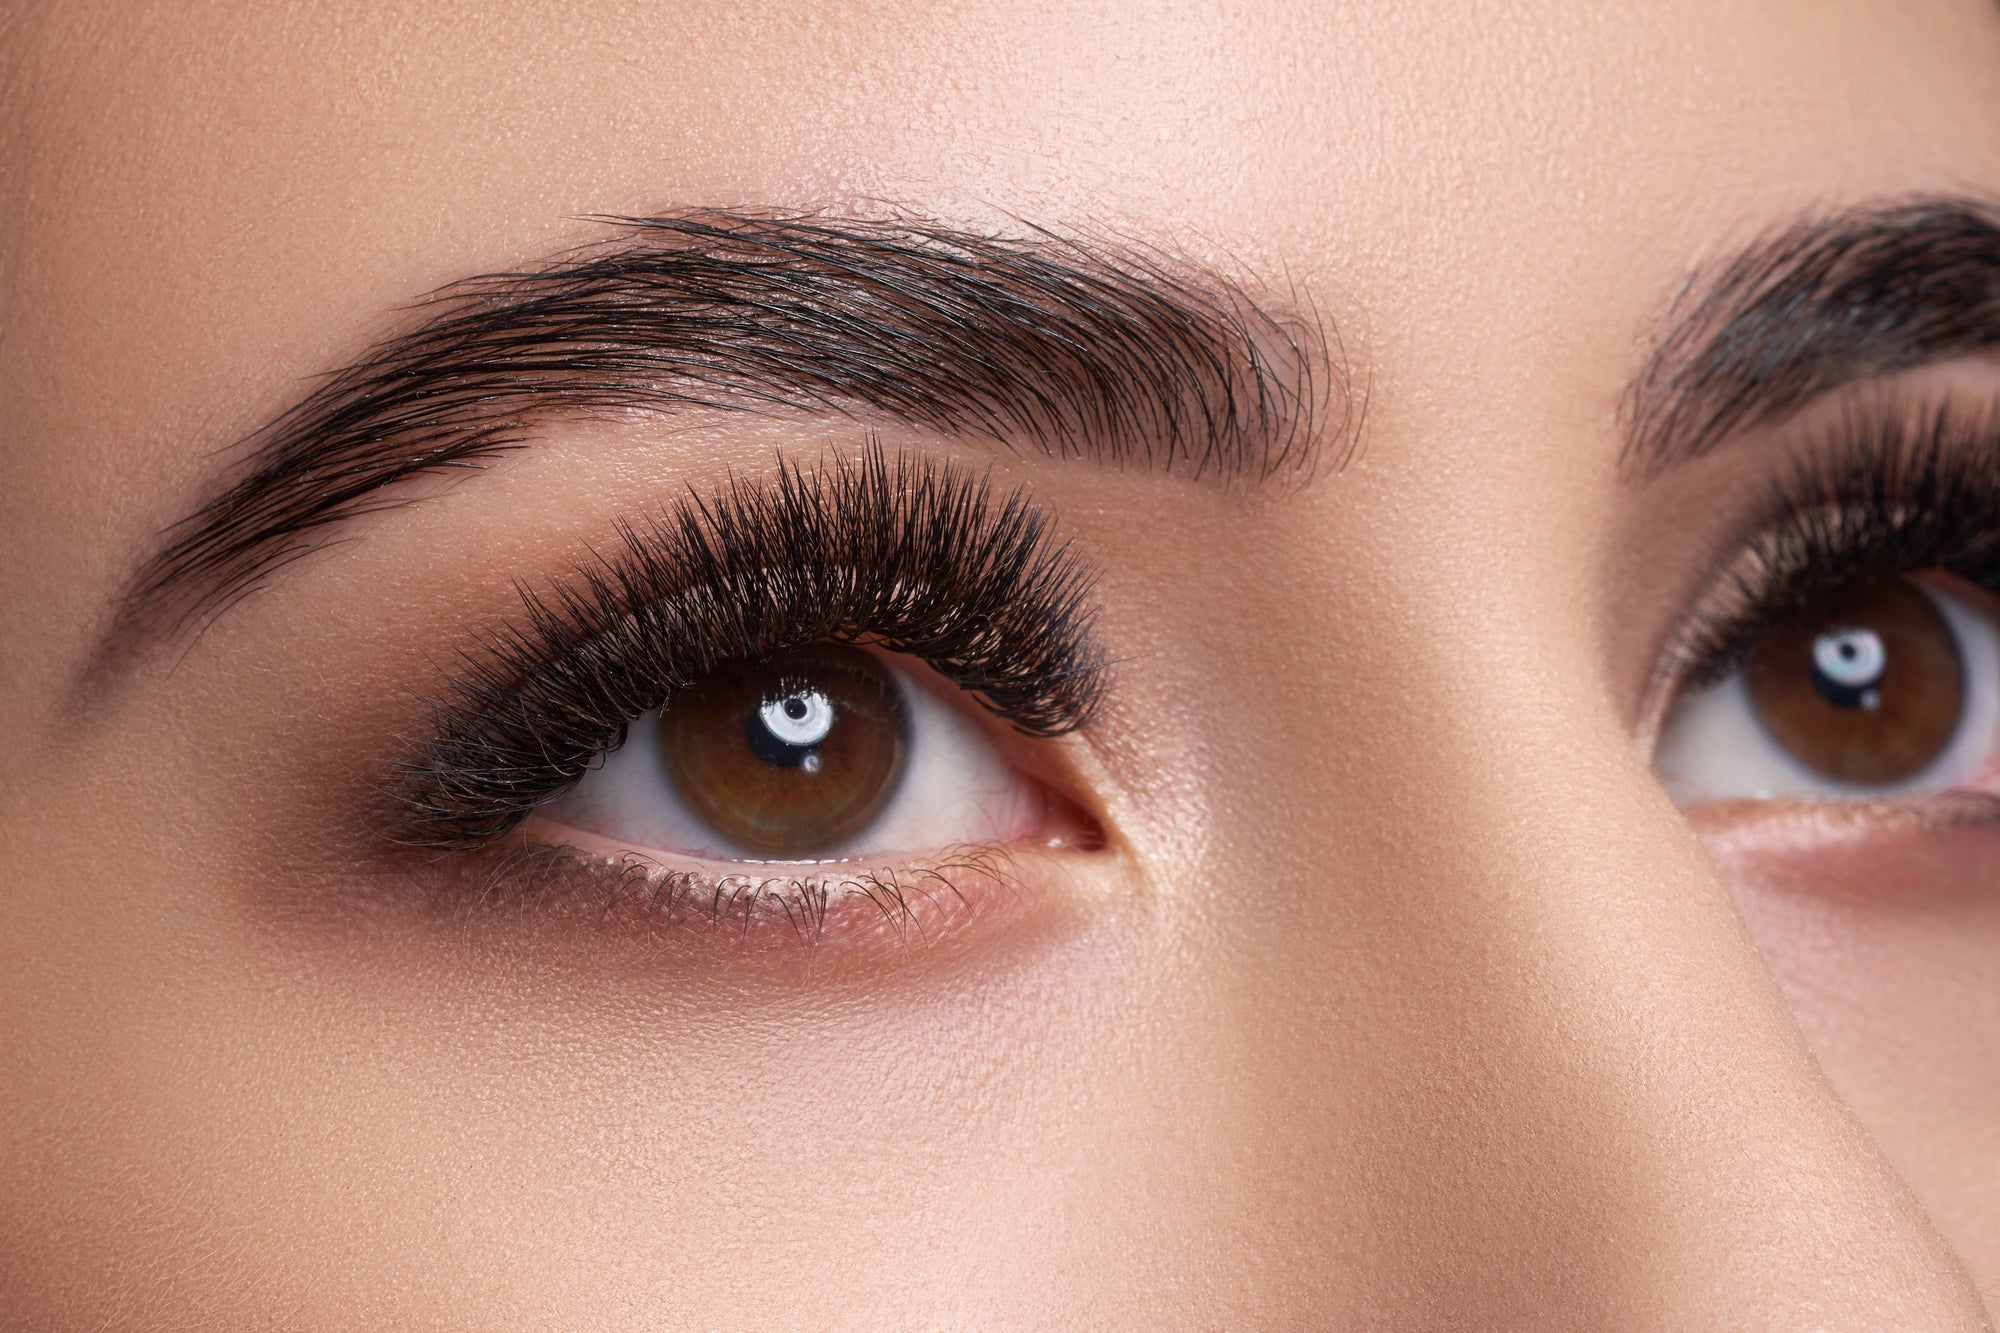 Lash Sets: How To Find the Right One